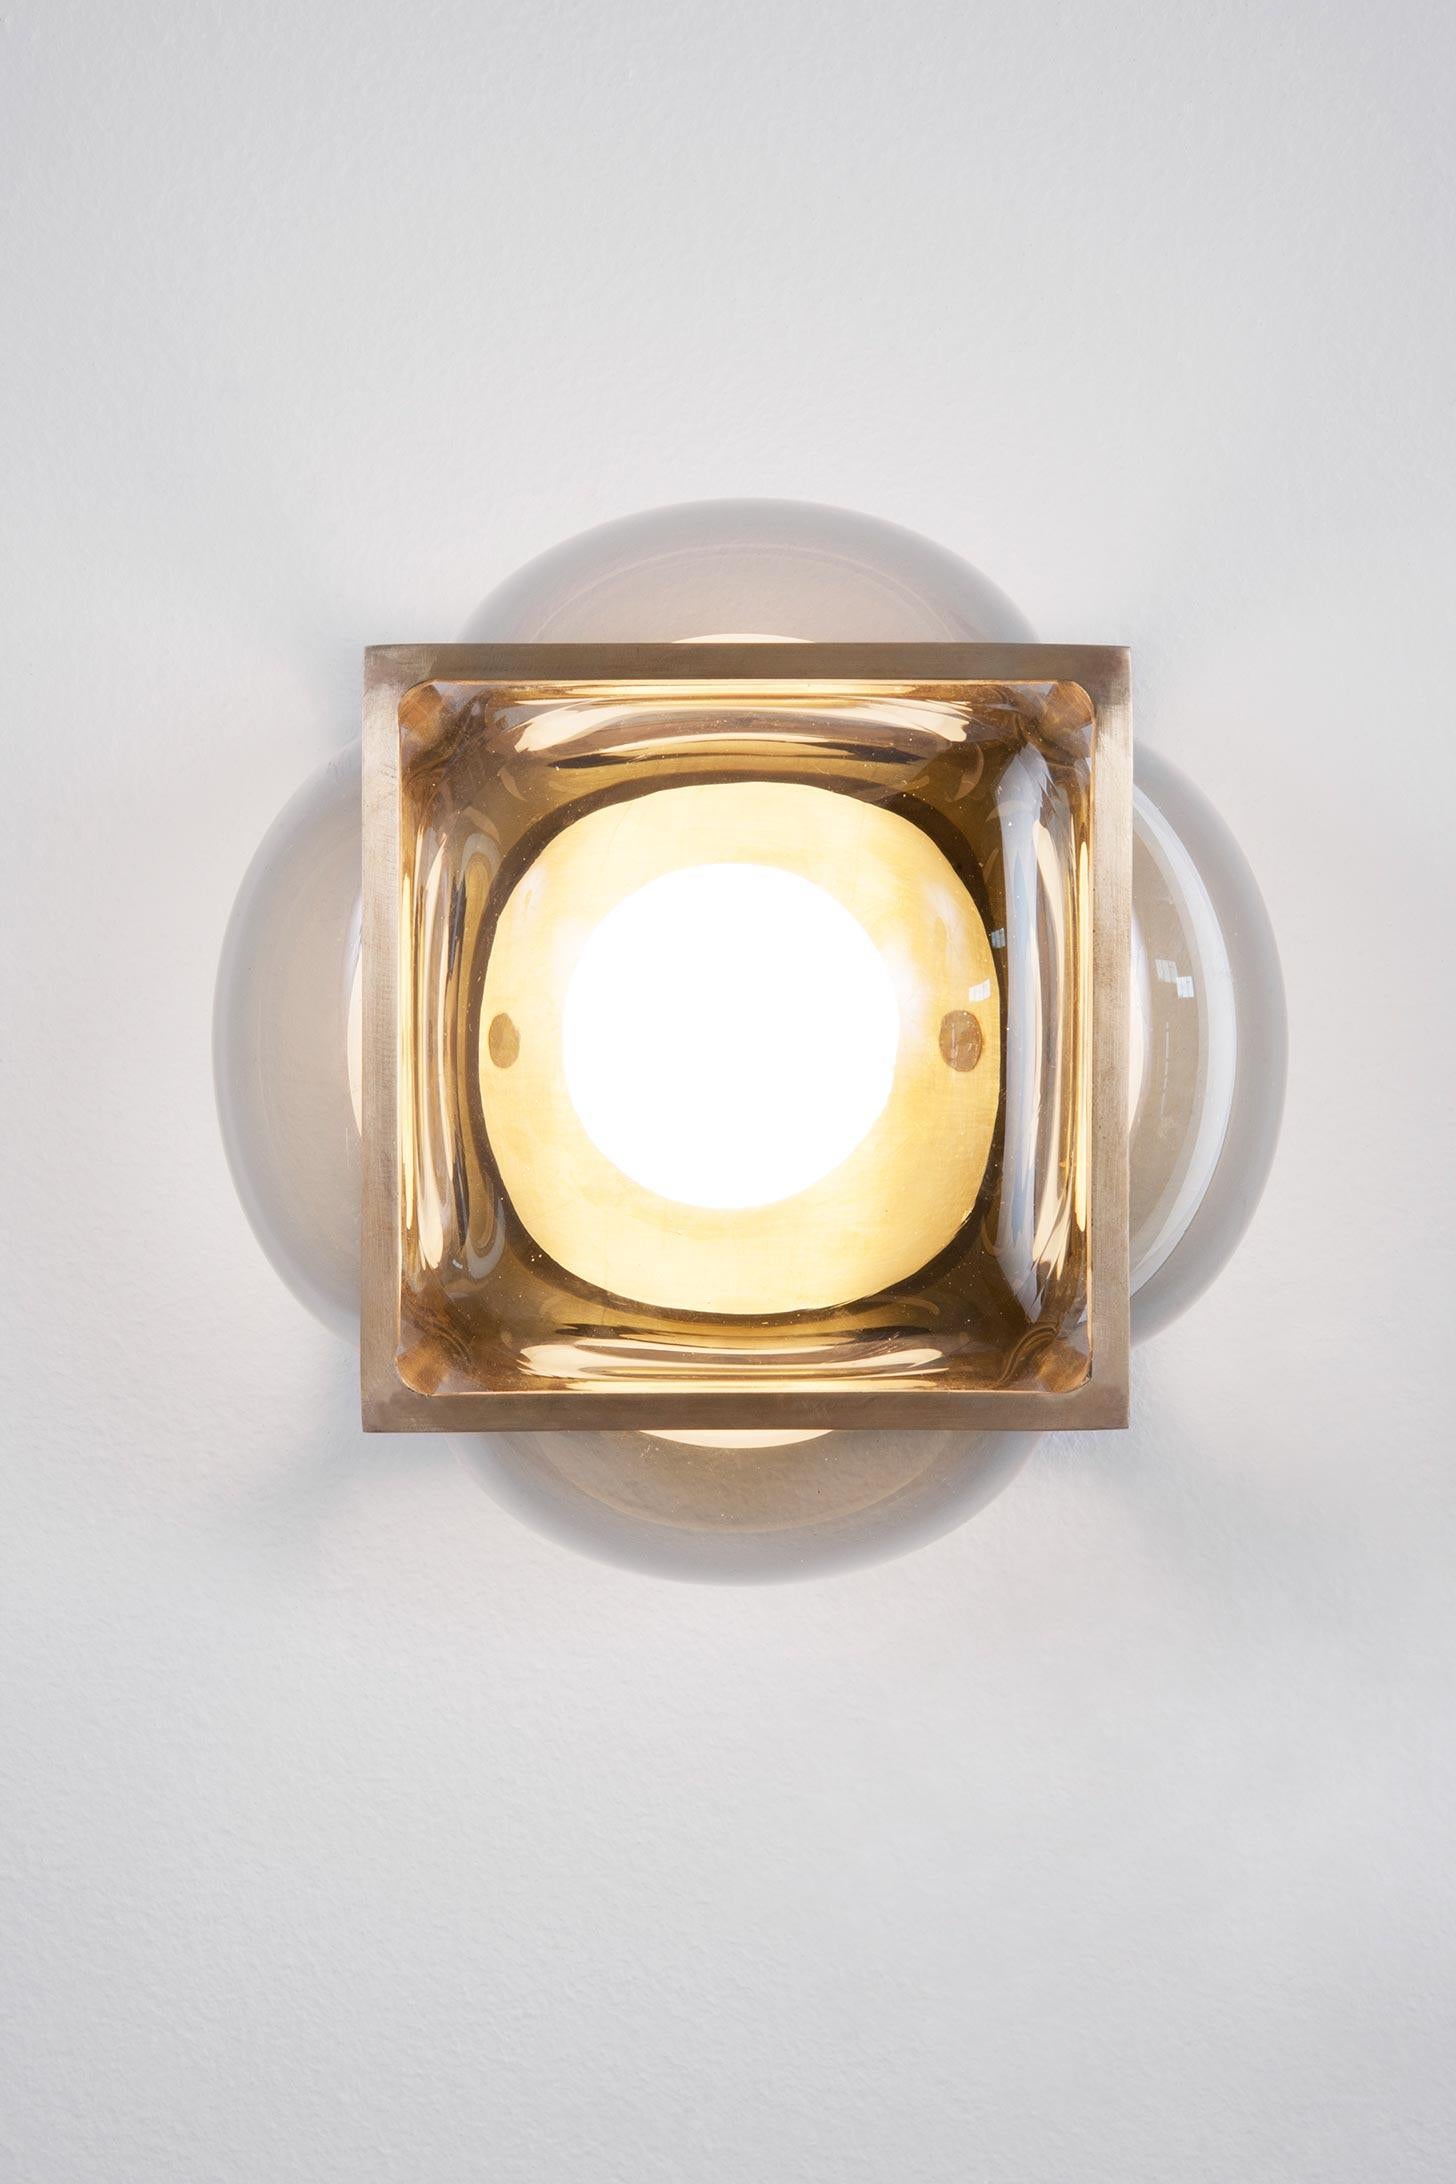 The Bulle can be used as a flushmount or sconce. The glass is hand blown into the solid brass frame. The hand blowed glass is available in either clear grey or opal white. Finish options for the metal frame are either blackened brass or unfinished